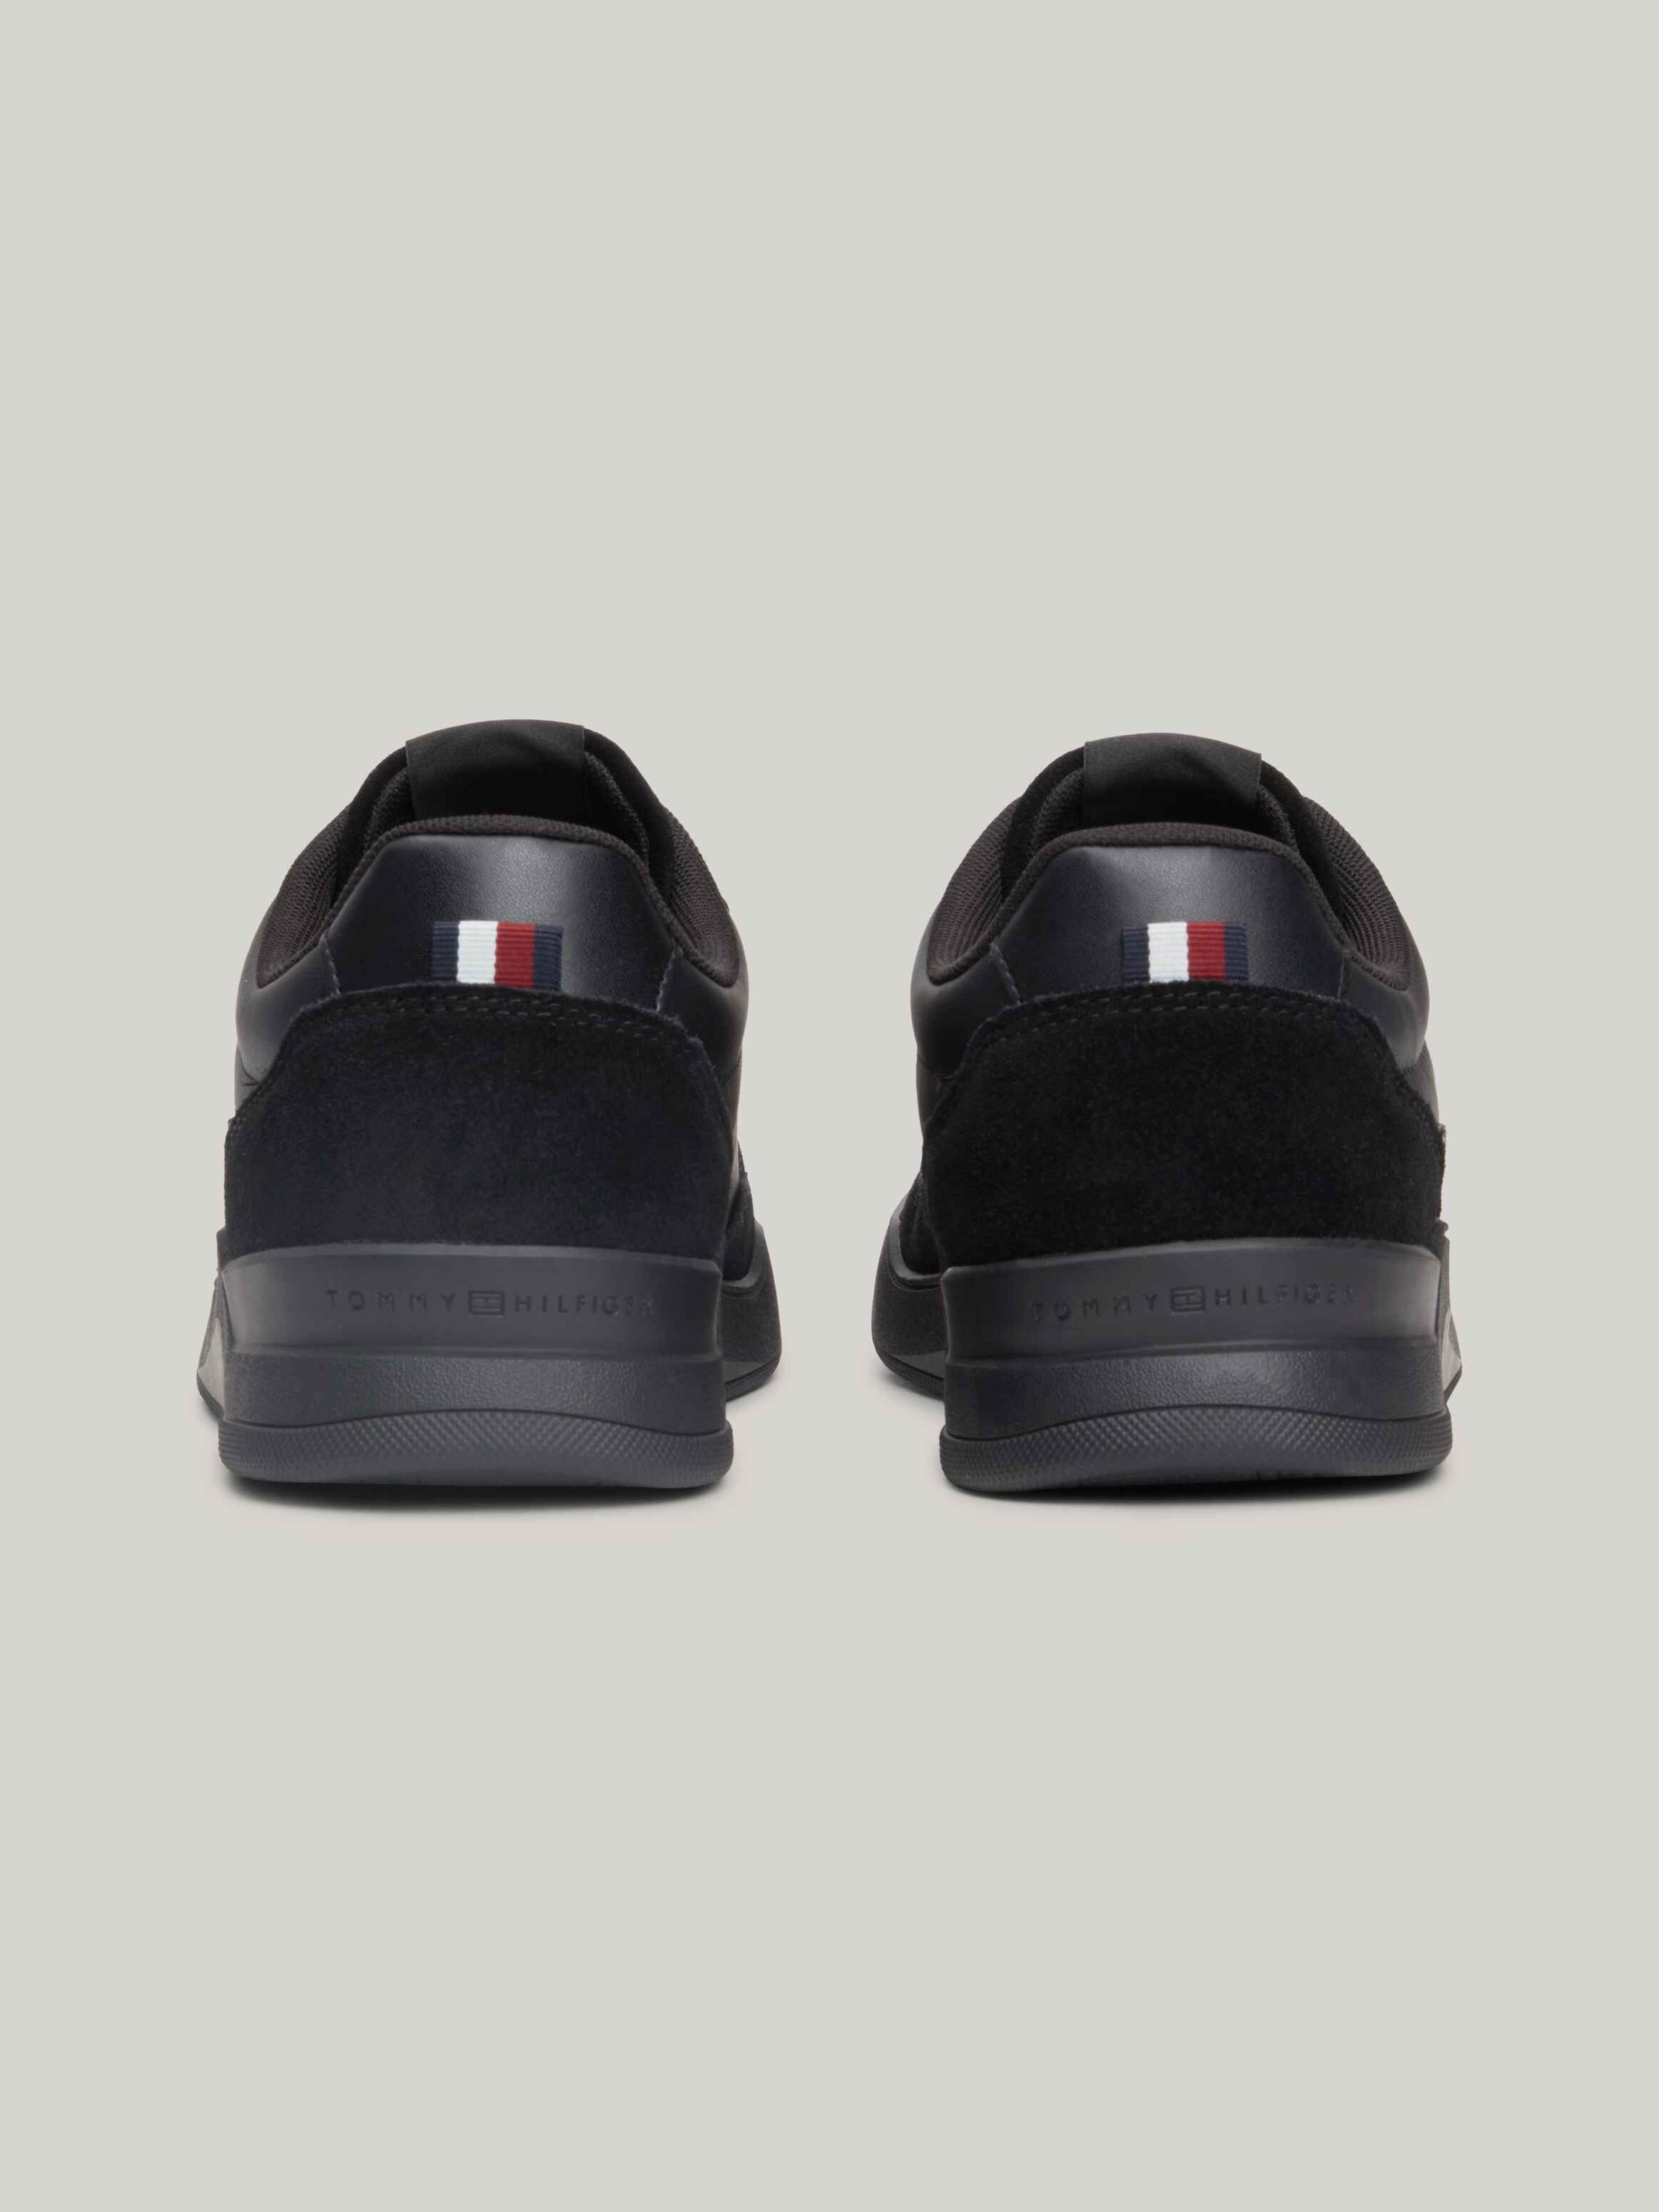 Elevated Cupsole Leather Trainers | Tommy Hilfiger